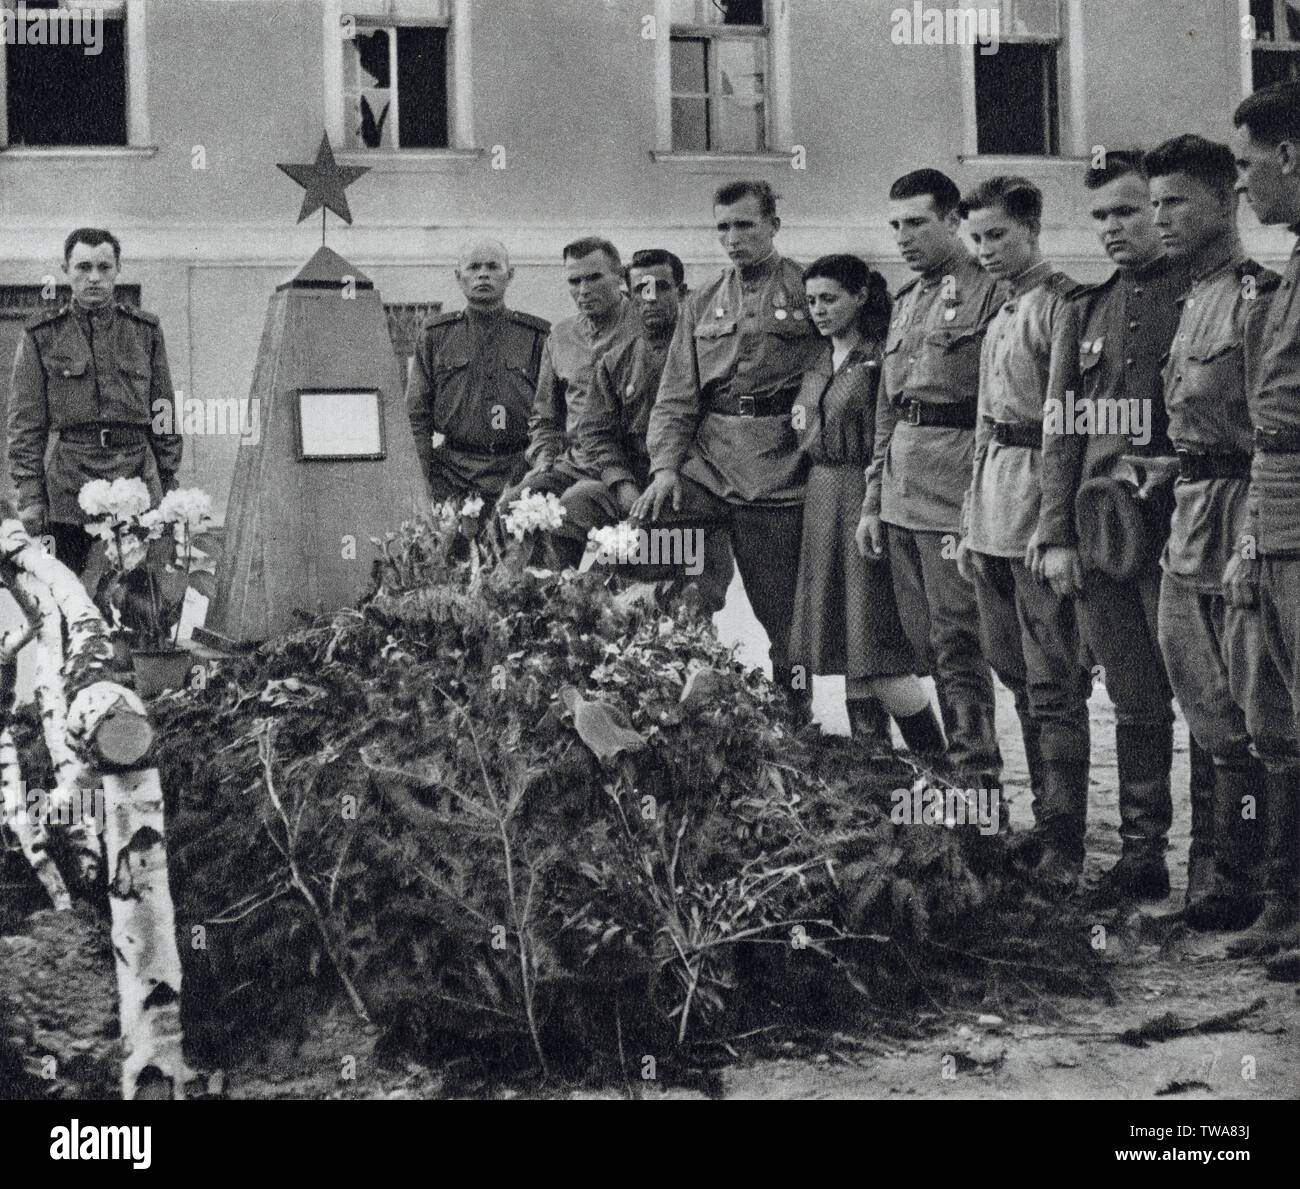 Red Army soldiers guard the grave of fallen Red Army soldiers in Bratislava in Czechoslovakia in May 1945. Black and white photograph by Czech photographer Koloman Cích published in the Czechoslovak book 'For the Eternal Times' ('Na věčné časy') issued in 1959. Courtesy of the Azoor Photo Collection. Stock Photo